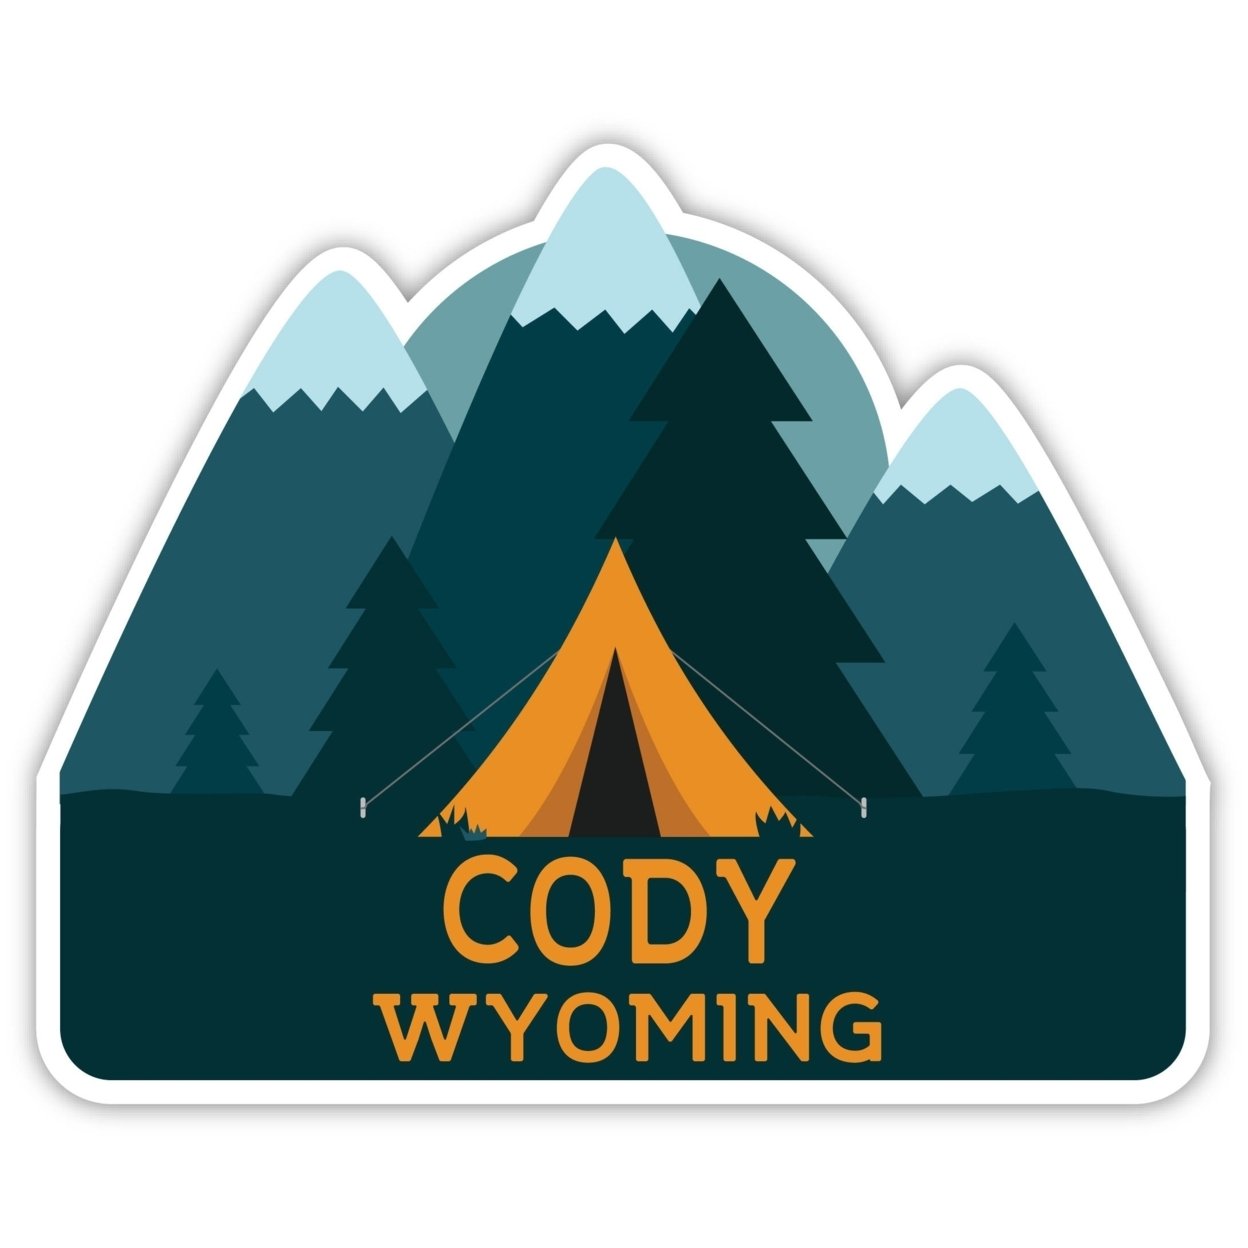 Cody Wyoming Souvenir Decorative Stickers (Choose Theme And Size) - Single Unit, 6-Inch, Camp Life